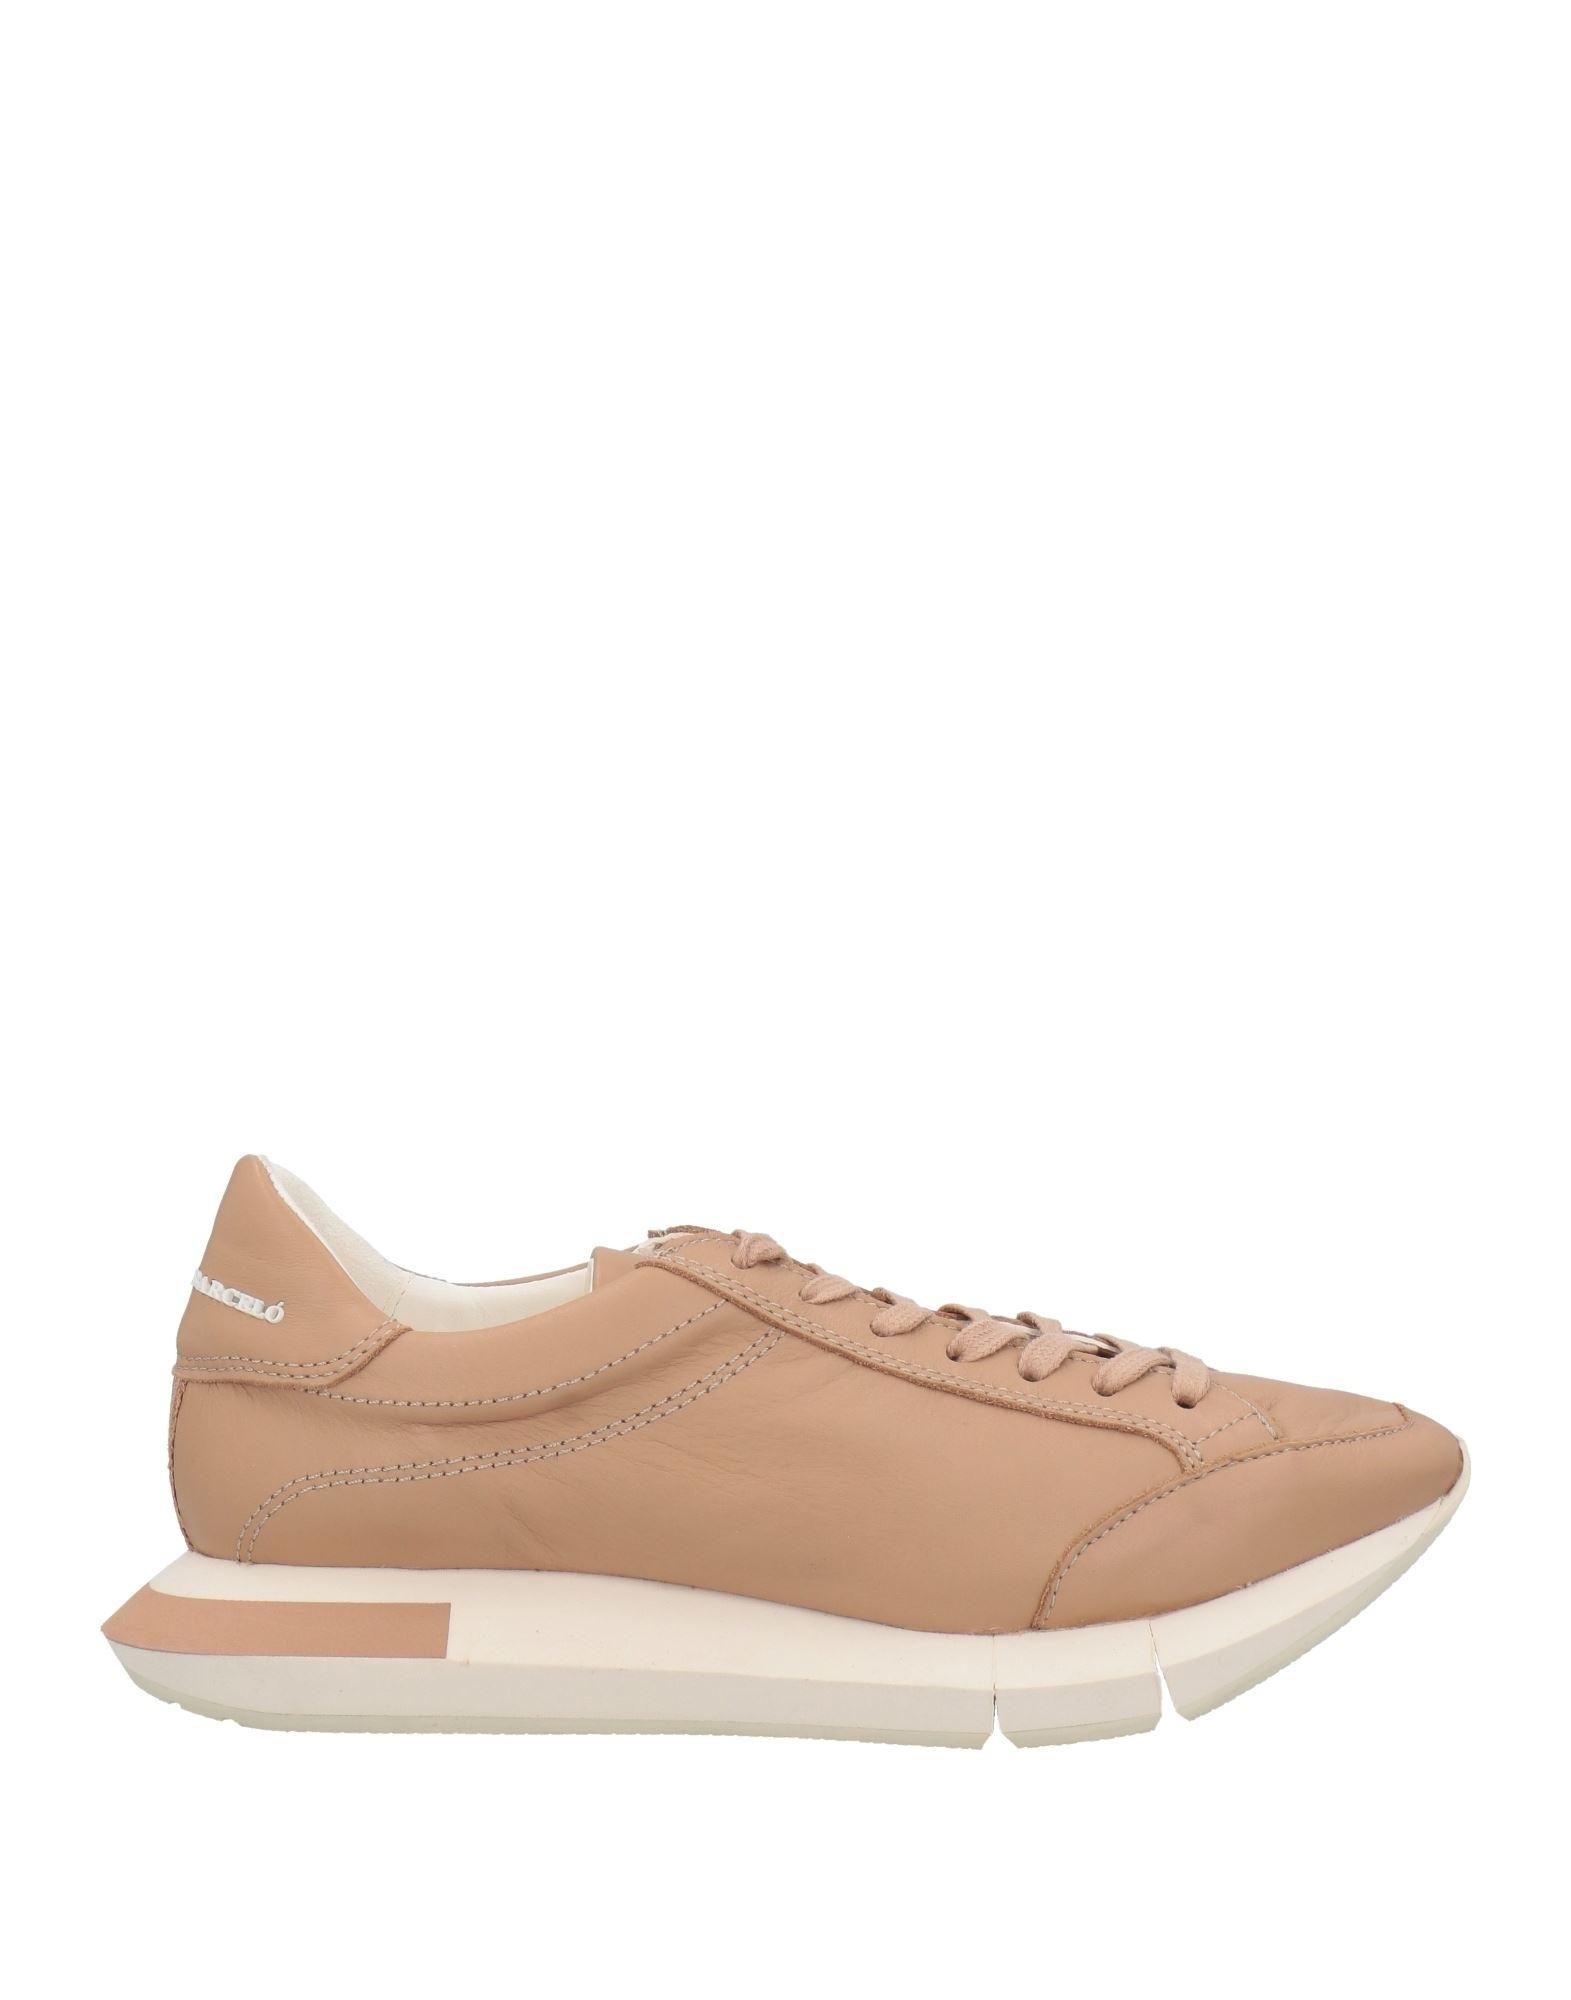 Paloma Barceló Sneakers in Natural | Lyst